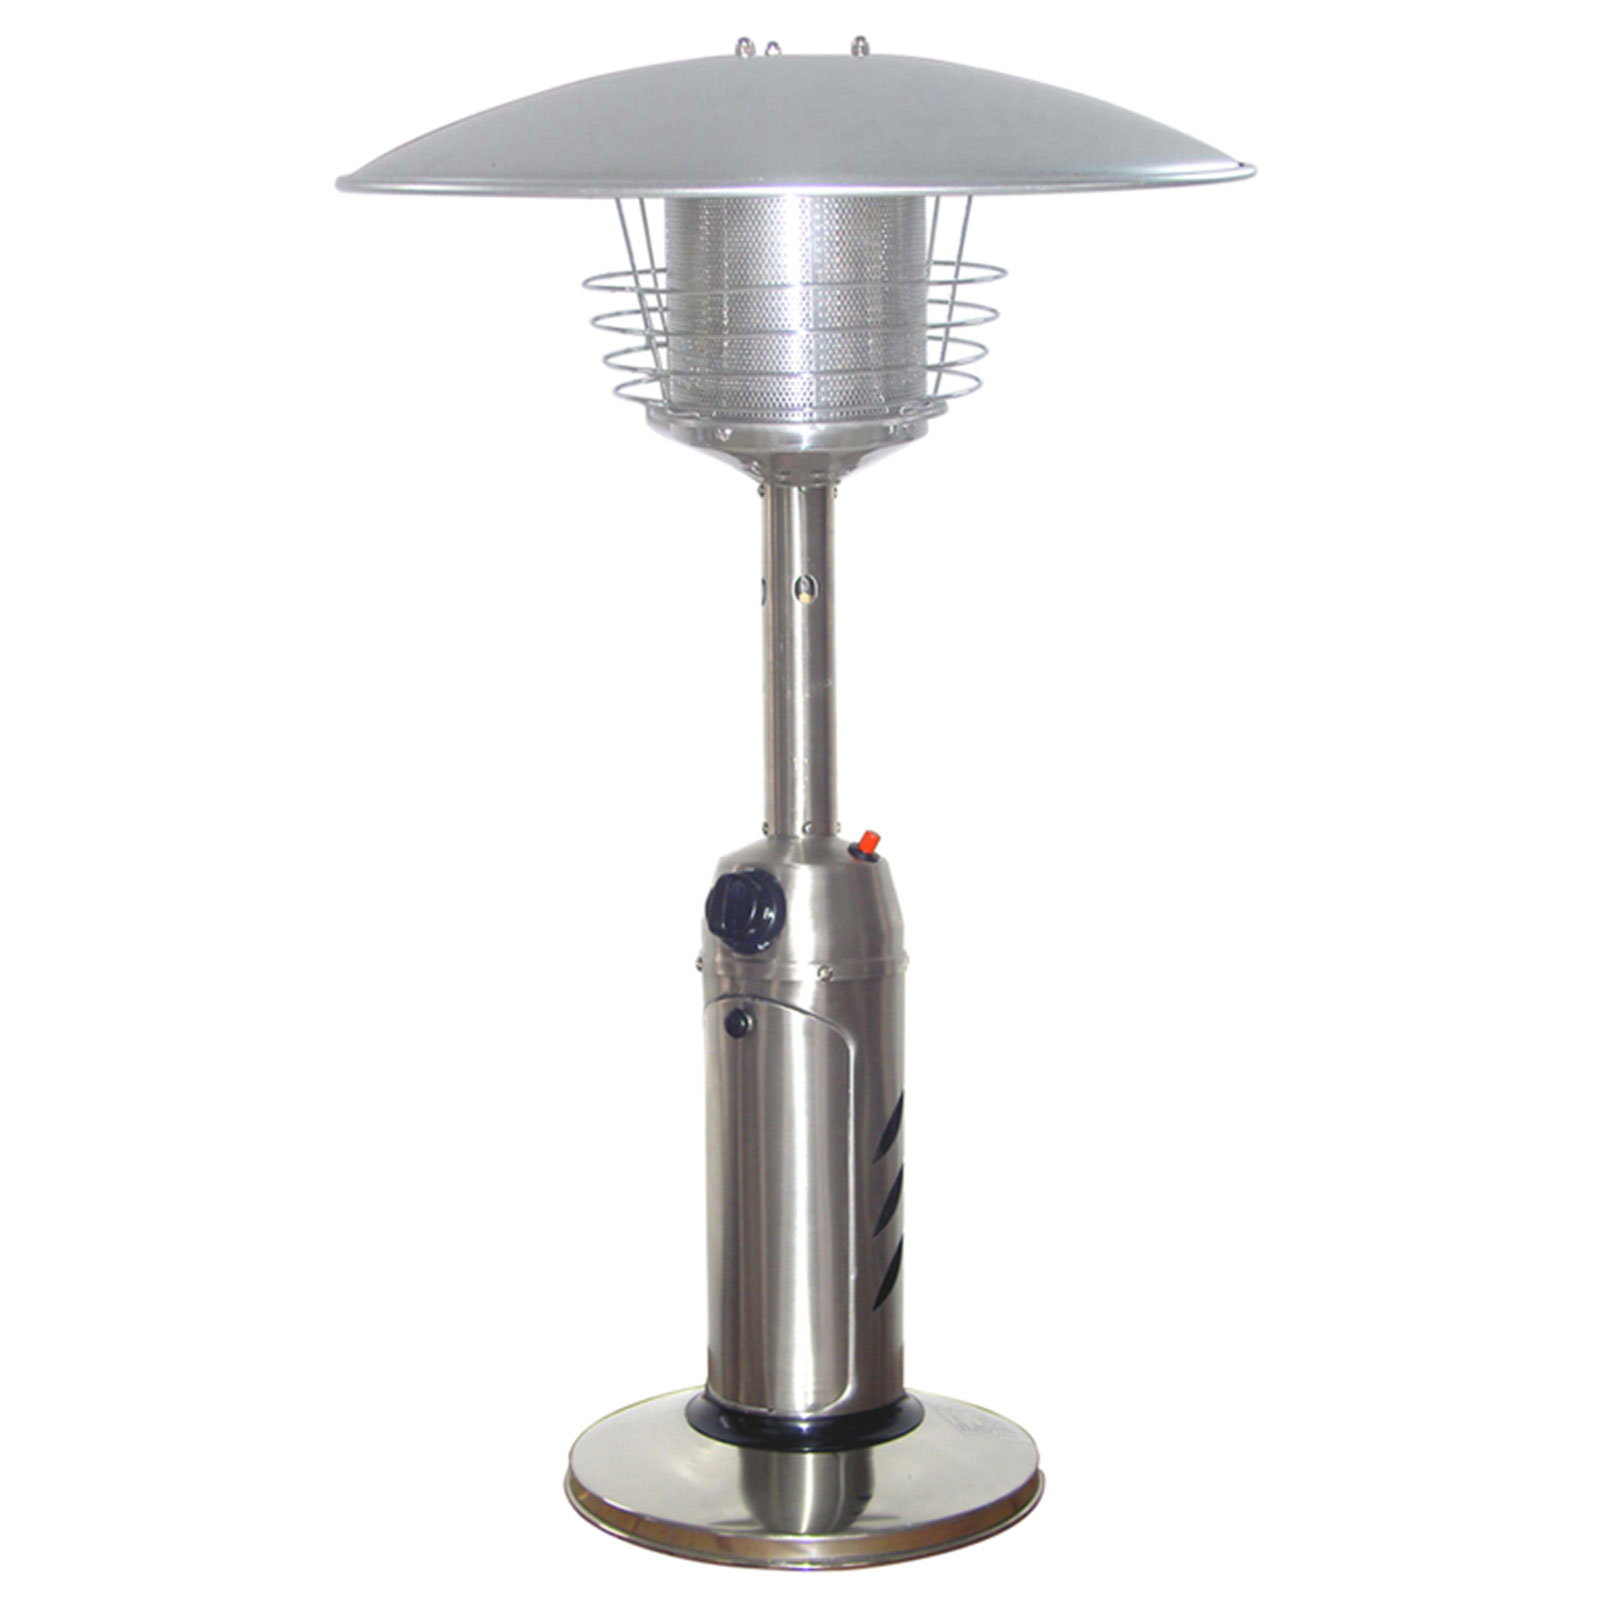 Portable Stainless Steel Tabletop Heater